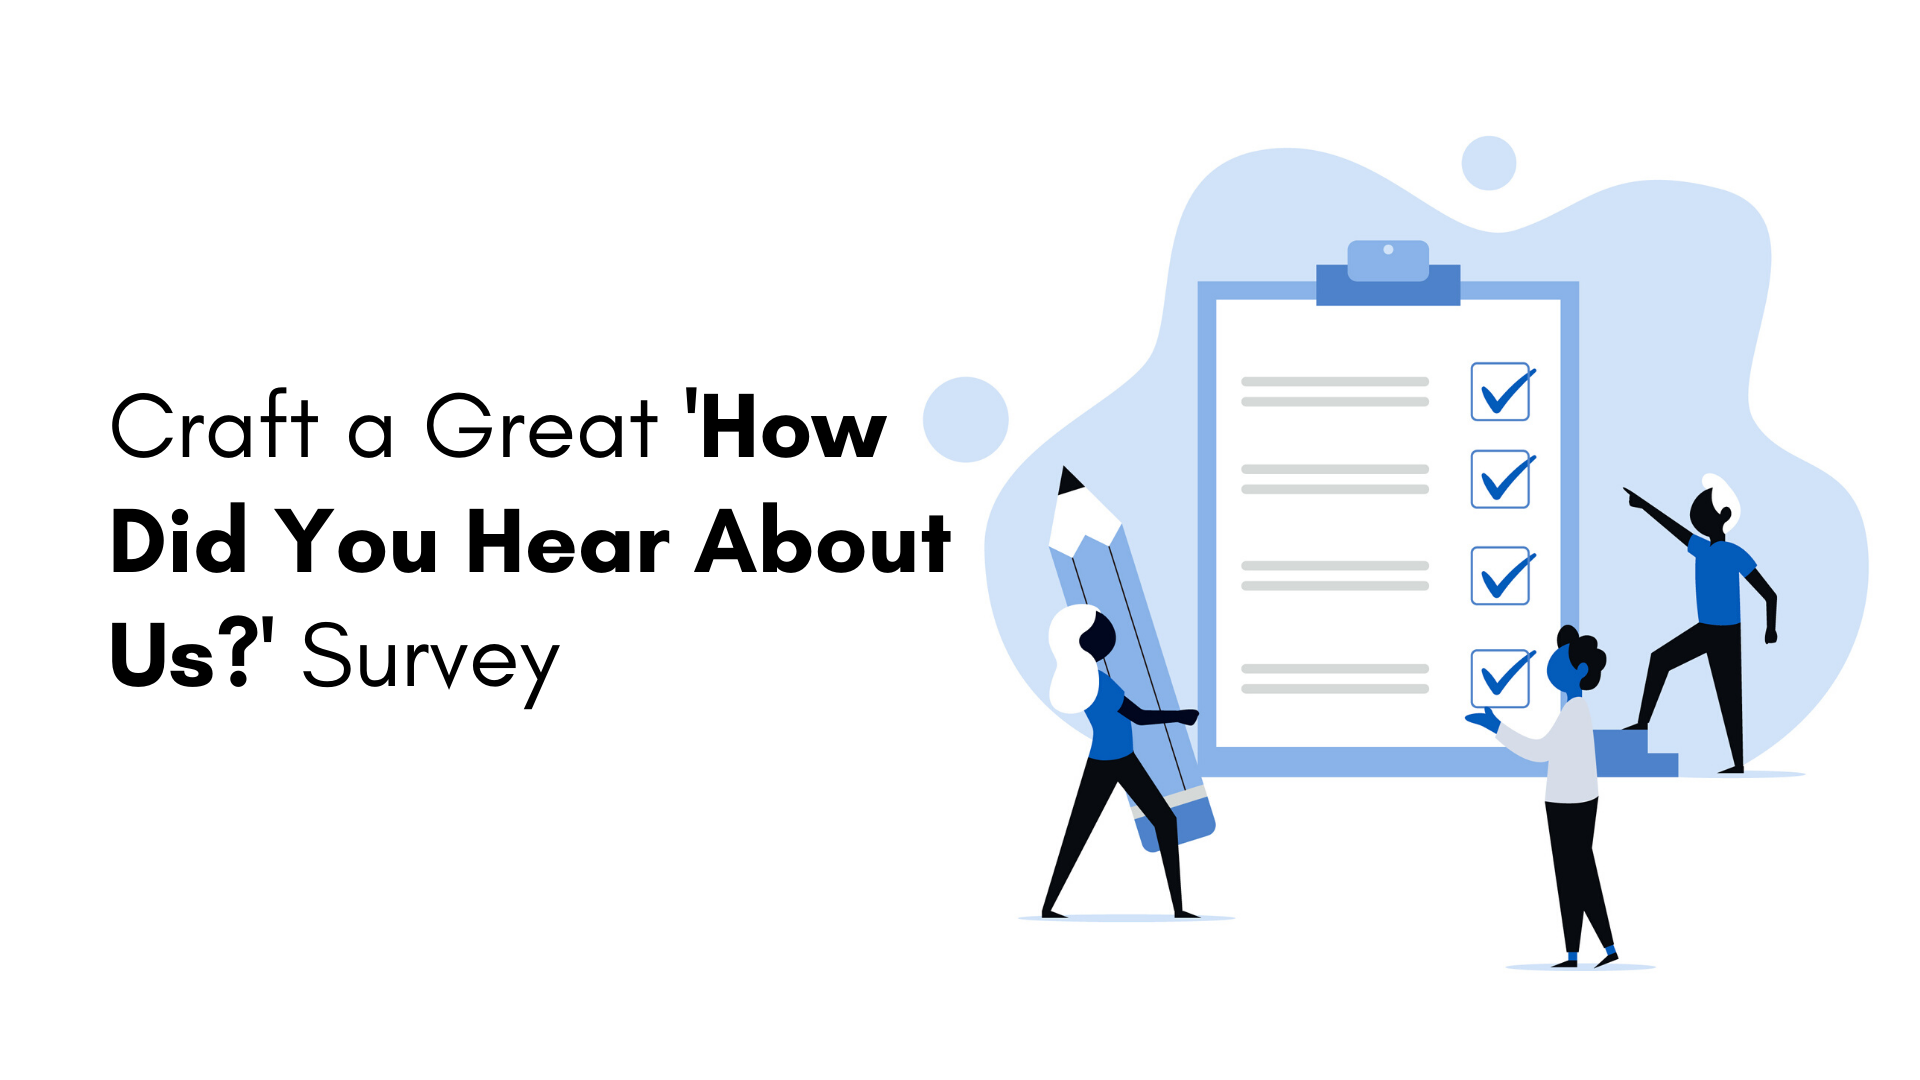 Craft a Great 'How Did You Hear About Us?' Survey